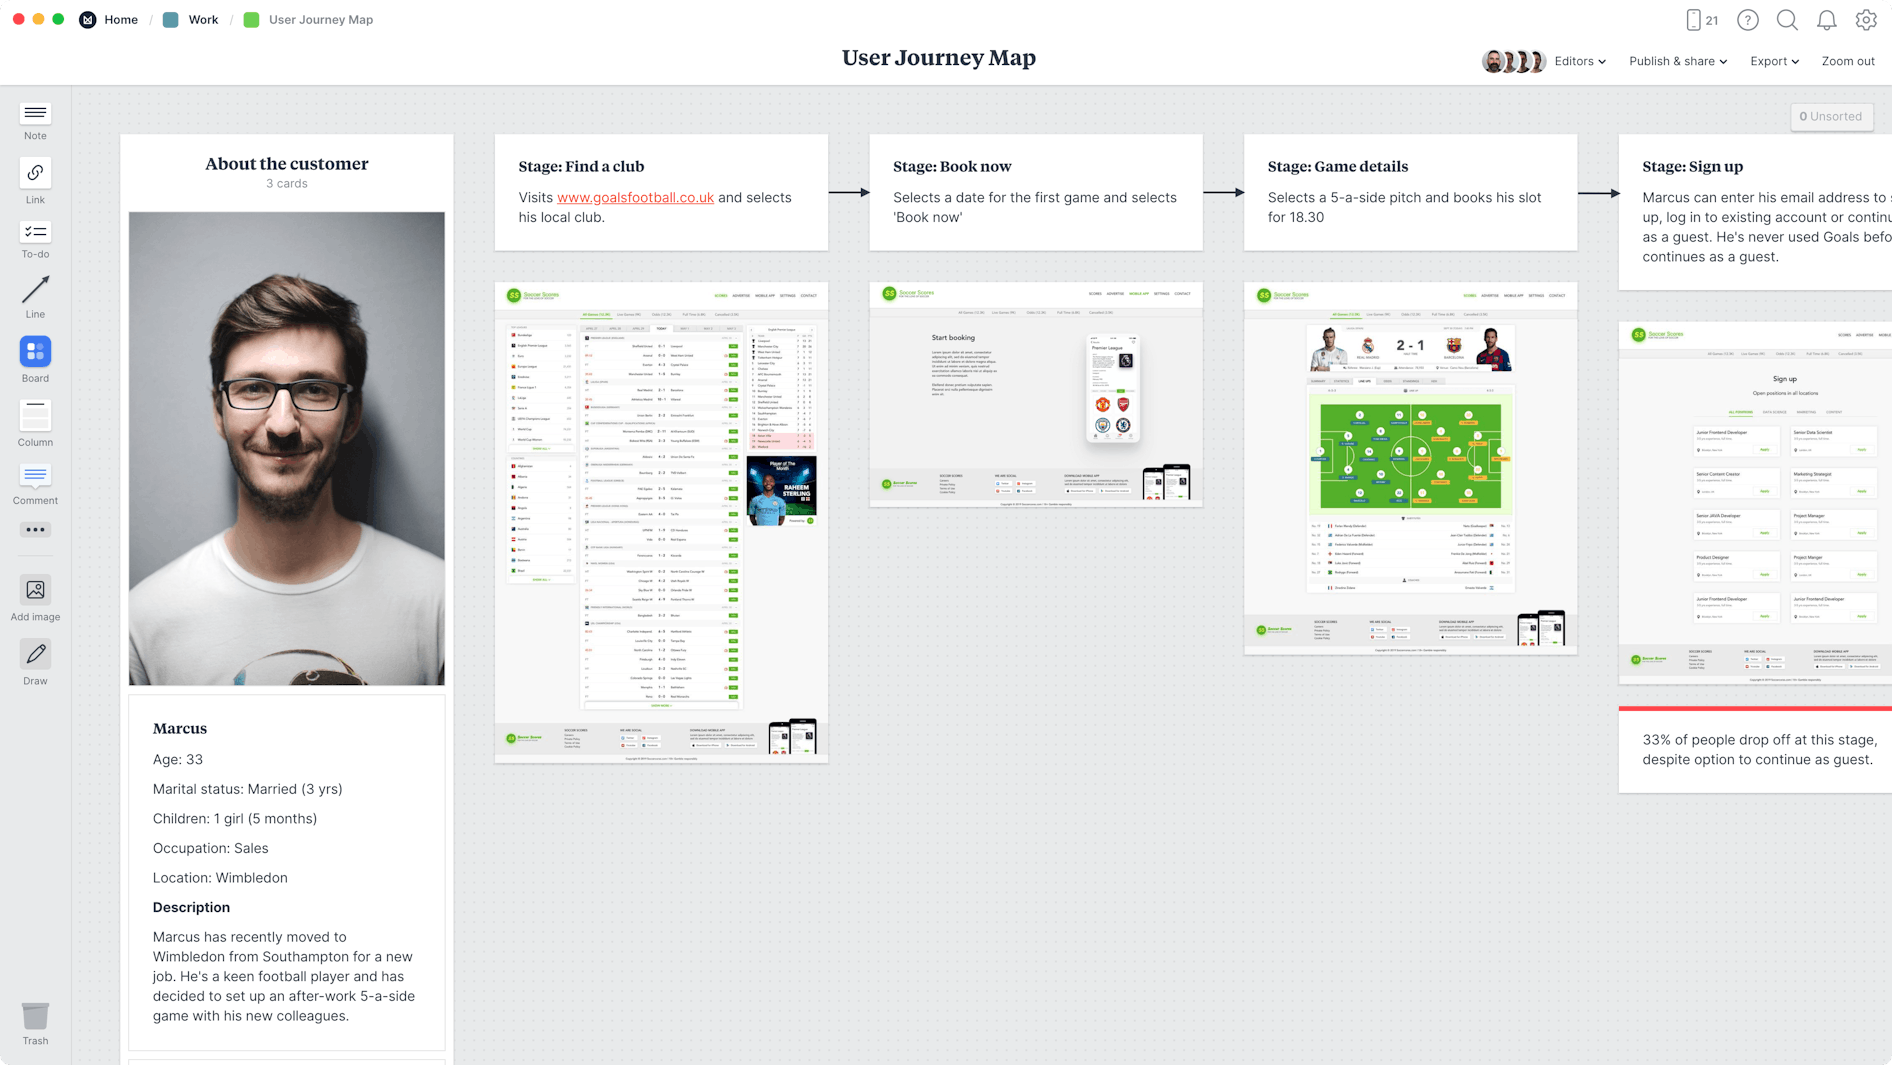 User Journey Map Template, within the Milanote app